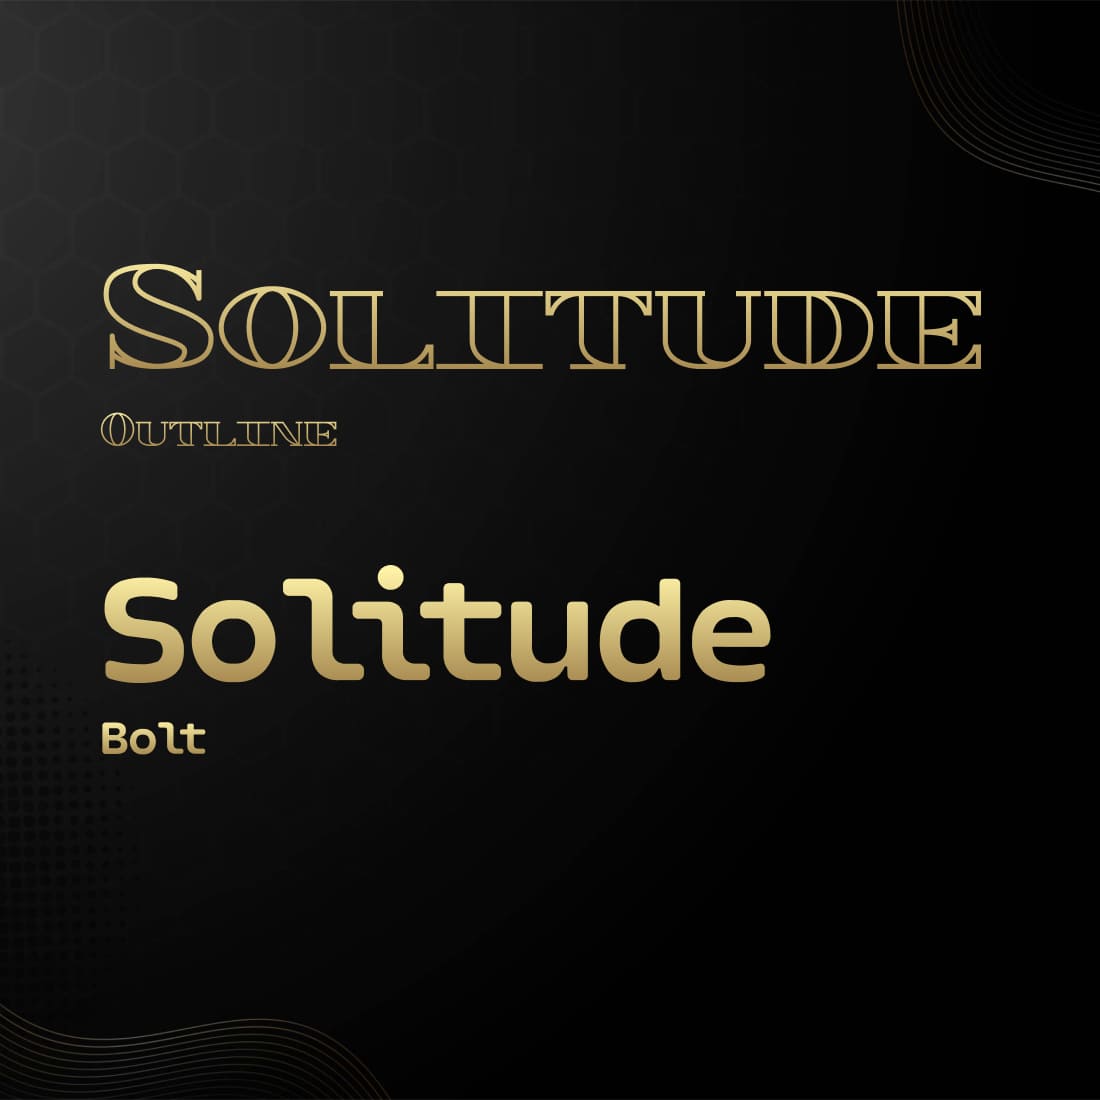 Solitude monospace sans-serif font outlined and bold preview.